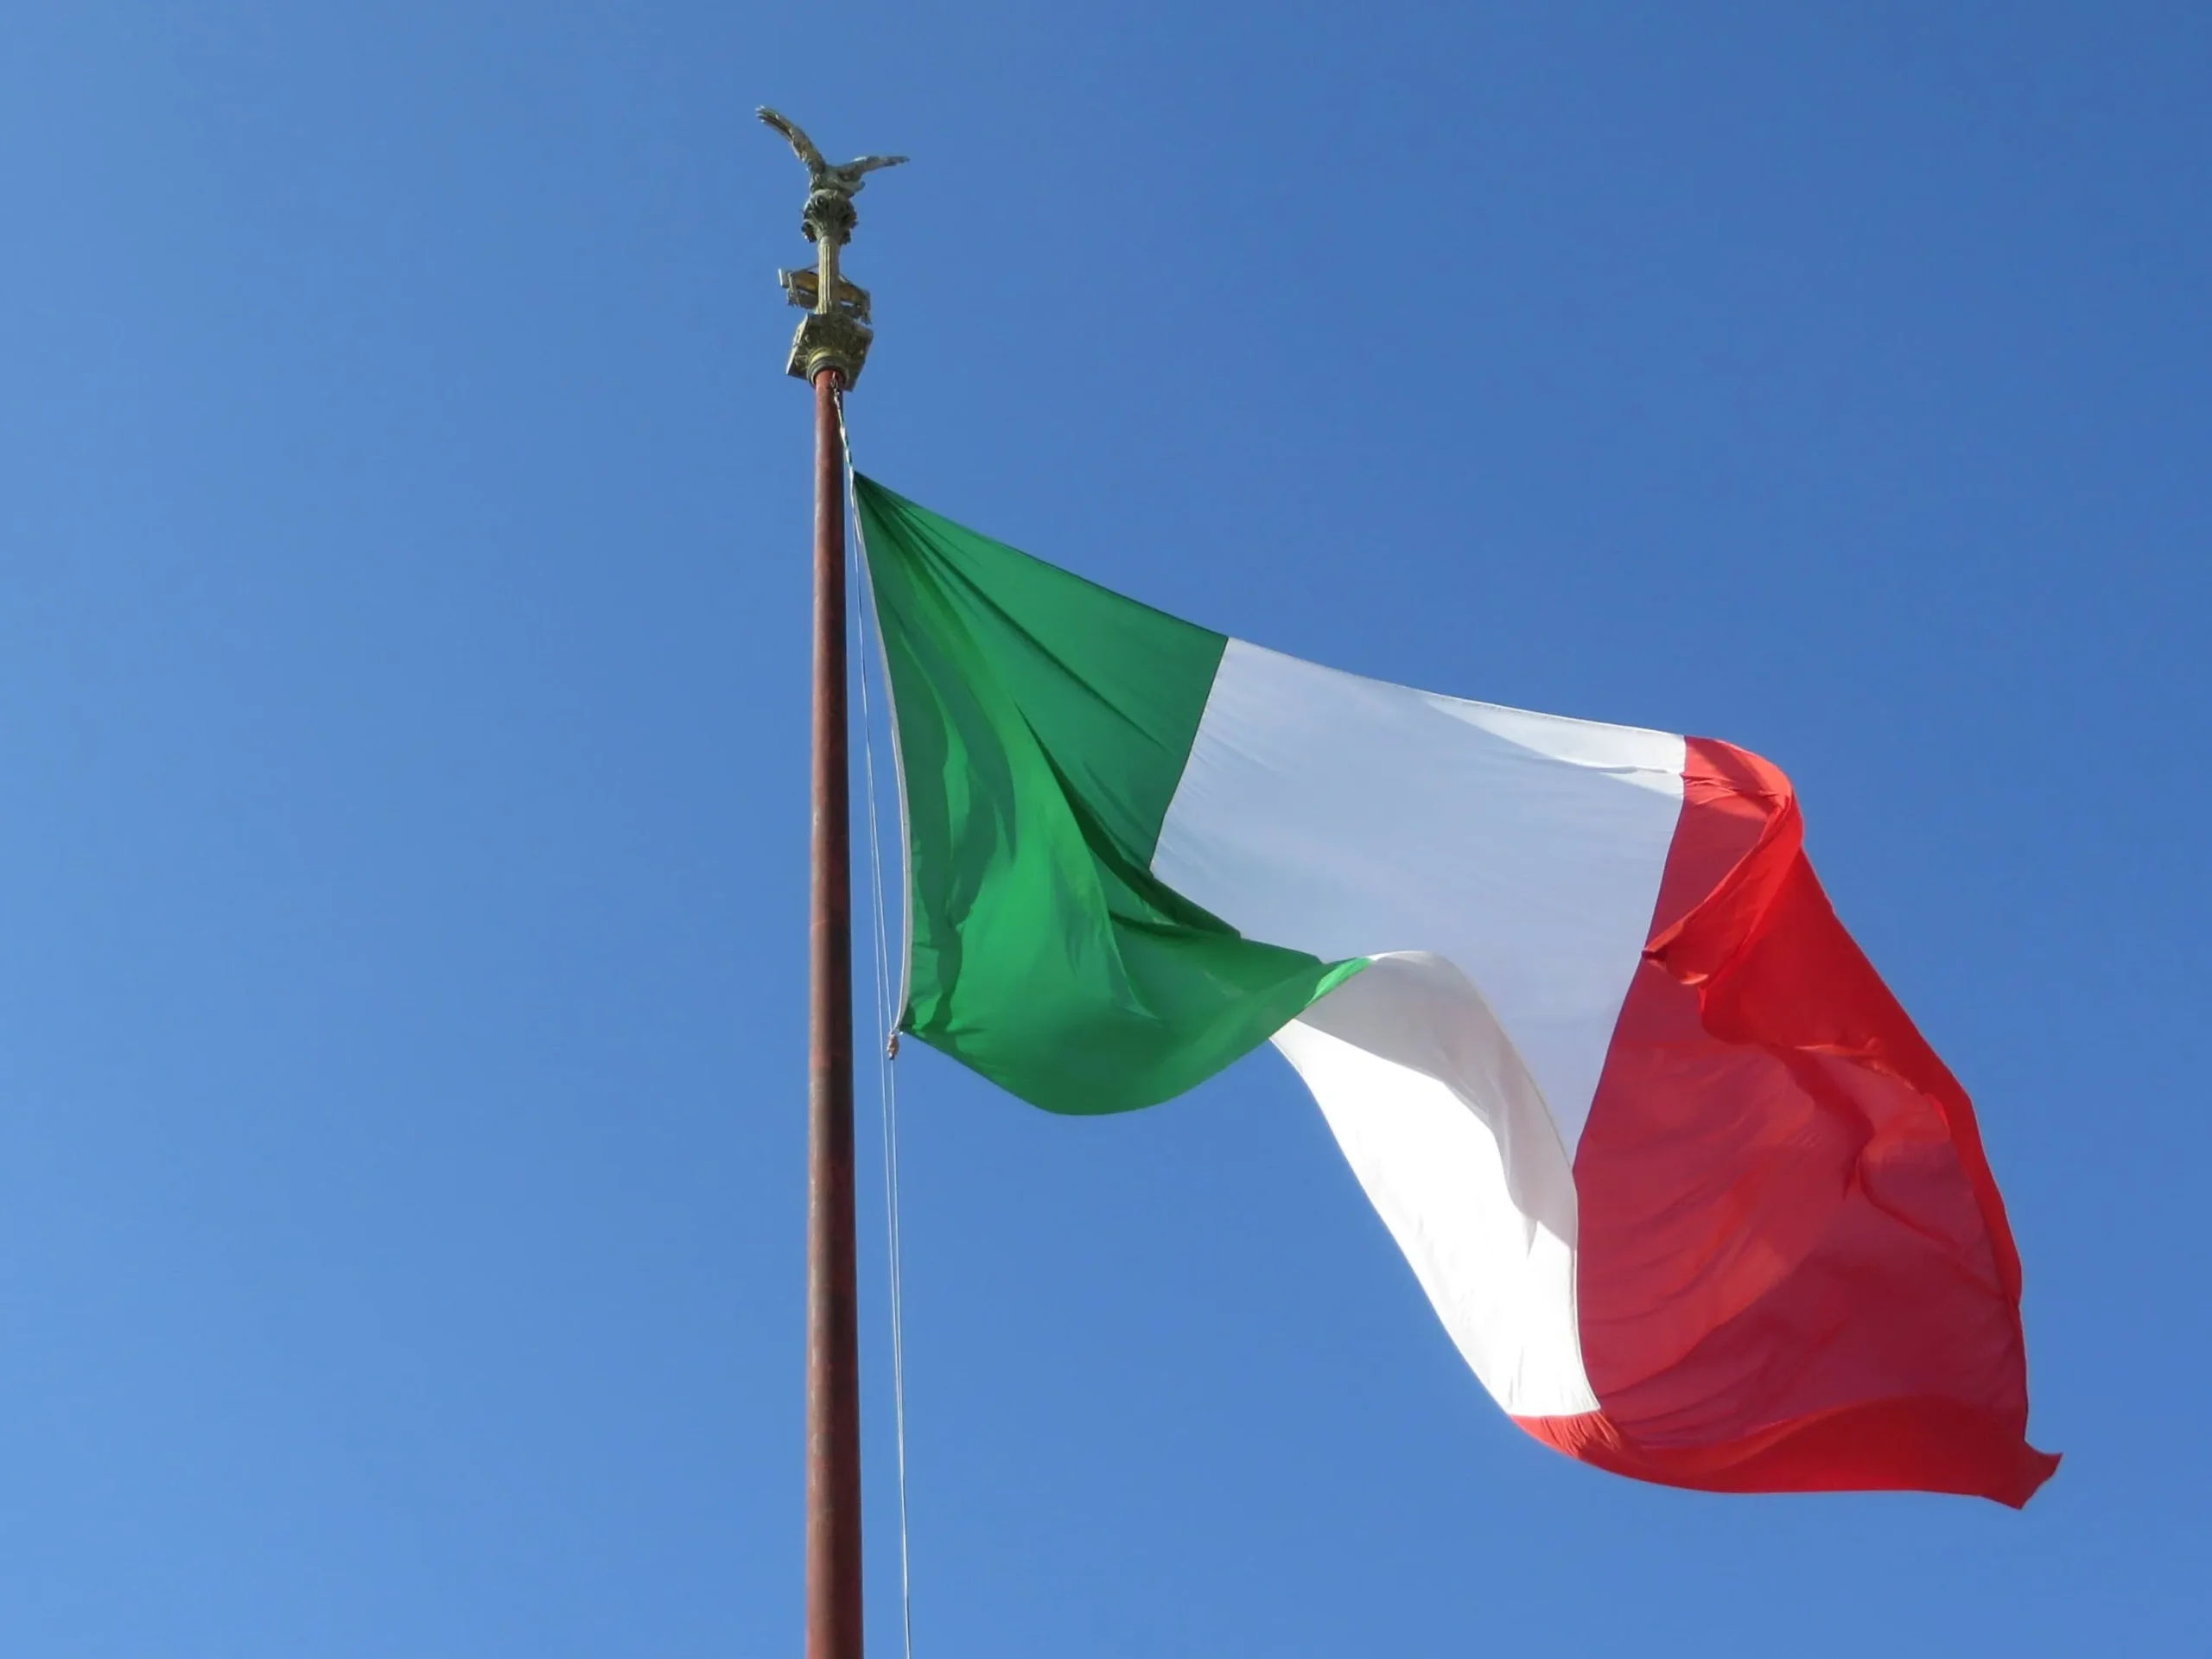 New technical specifications for the e-invoicing introduction in Italy